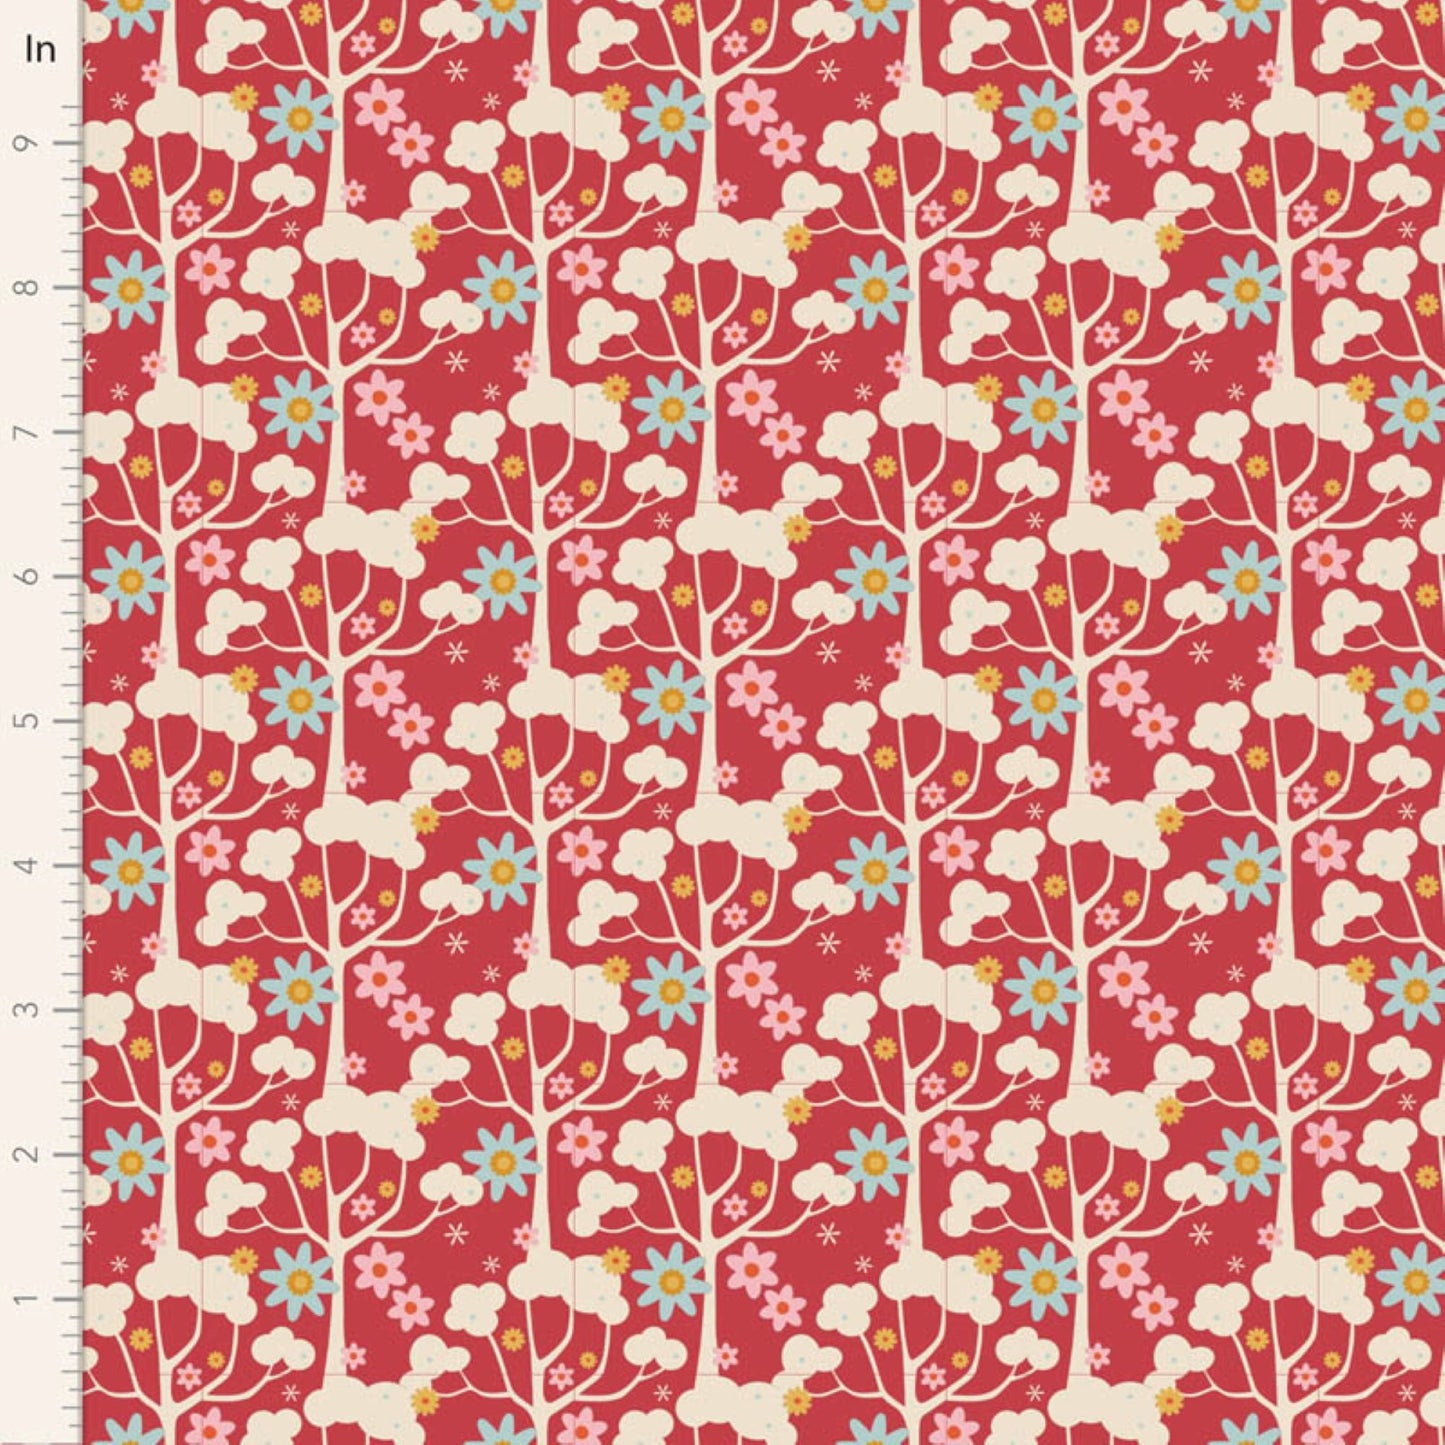 Tilda Jubilee and Farm Flowers floral red bundle 7 Fat Eighths cotton quilt fabric